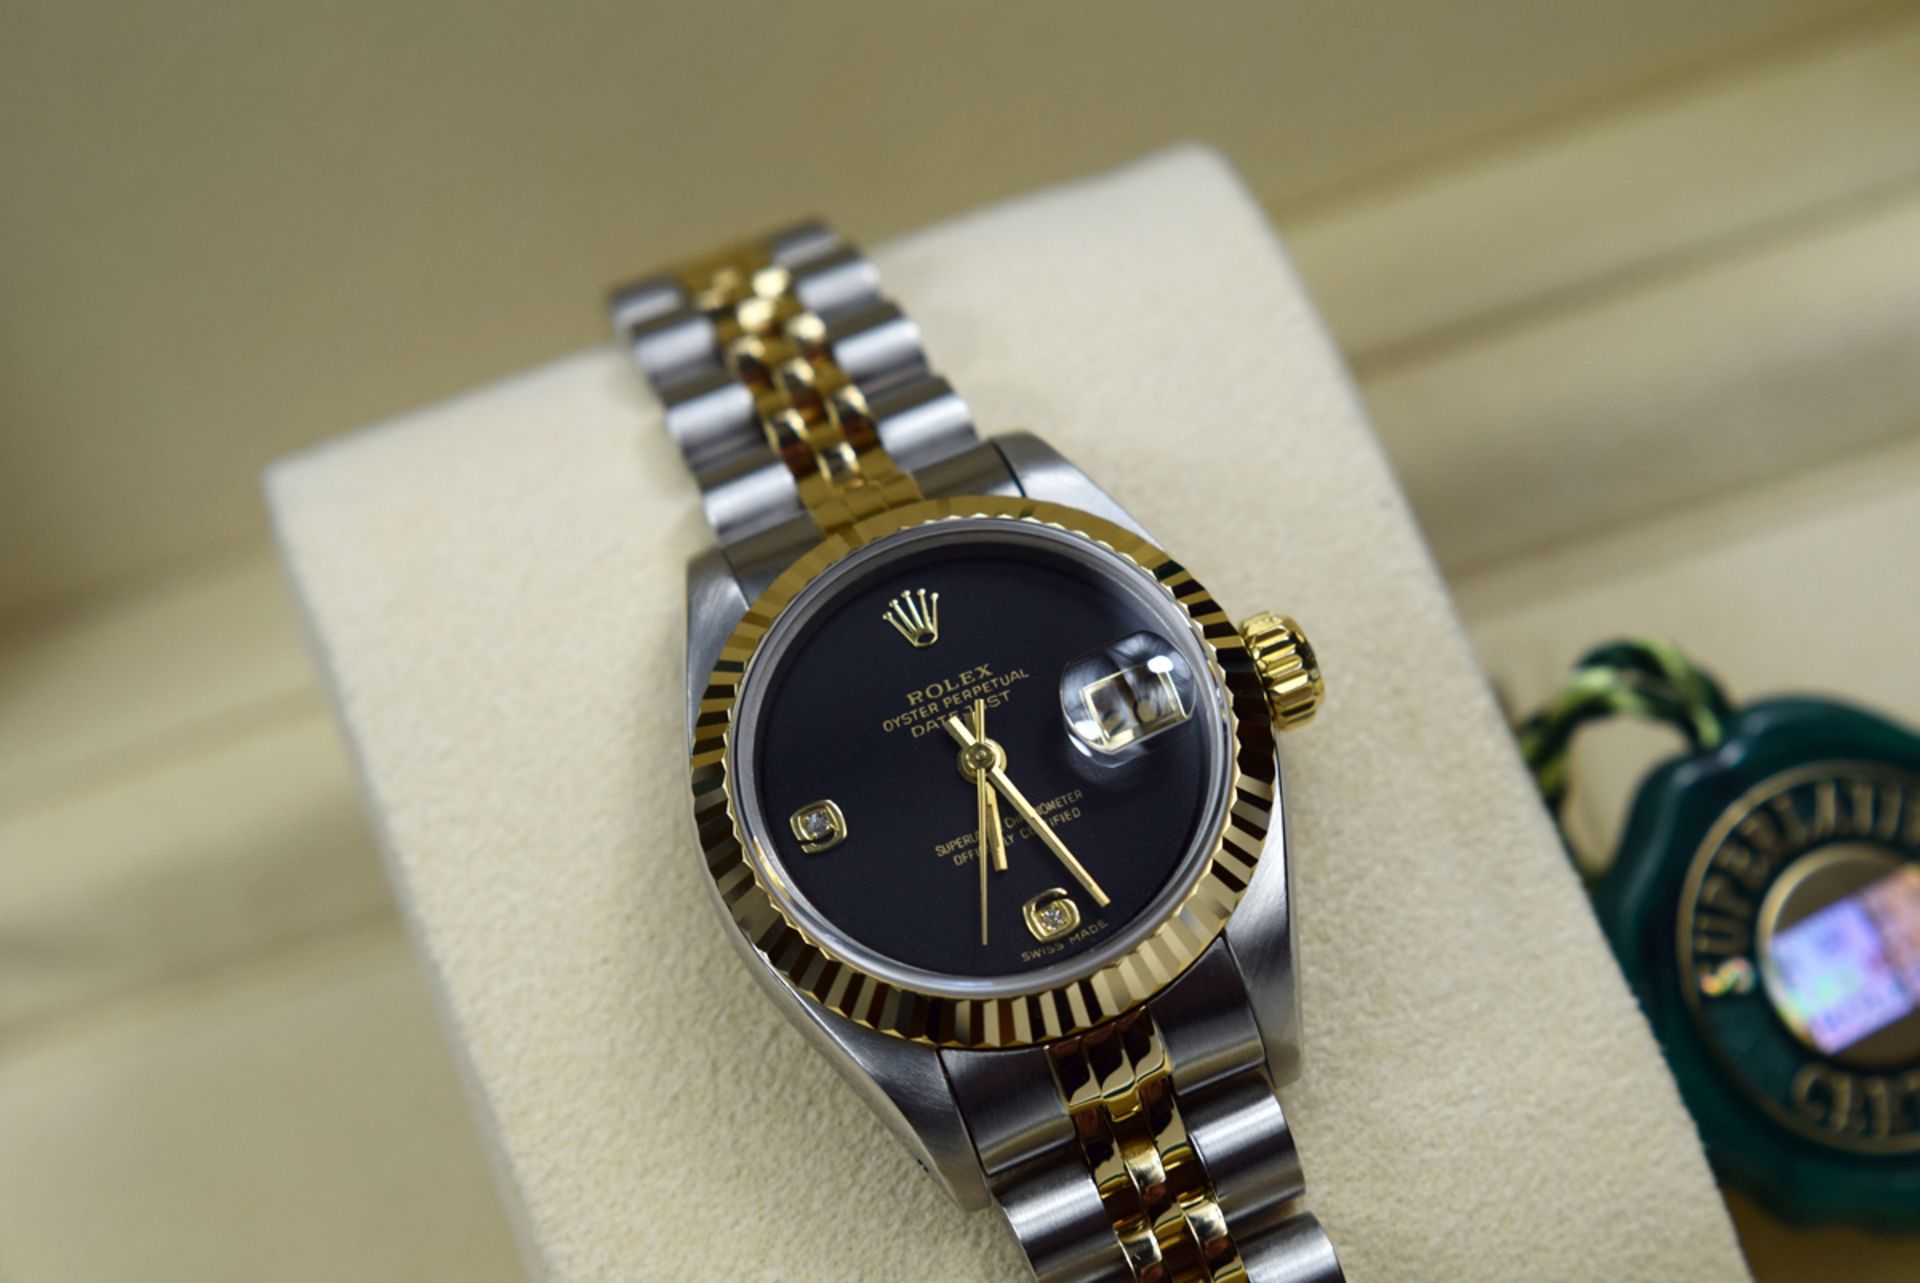 ROLEX 'LADY DATEJUST' 26MM - STEEL & 18K GOLD WITH ✦ RARE DIAMOND DIAL - Image 2 of 10